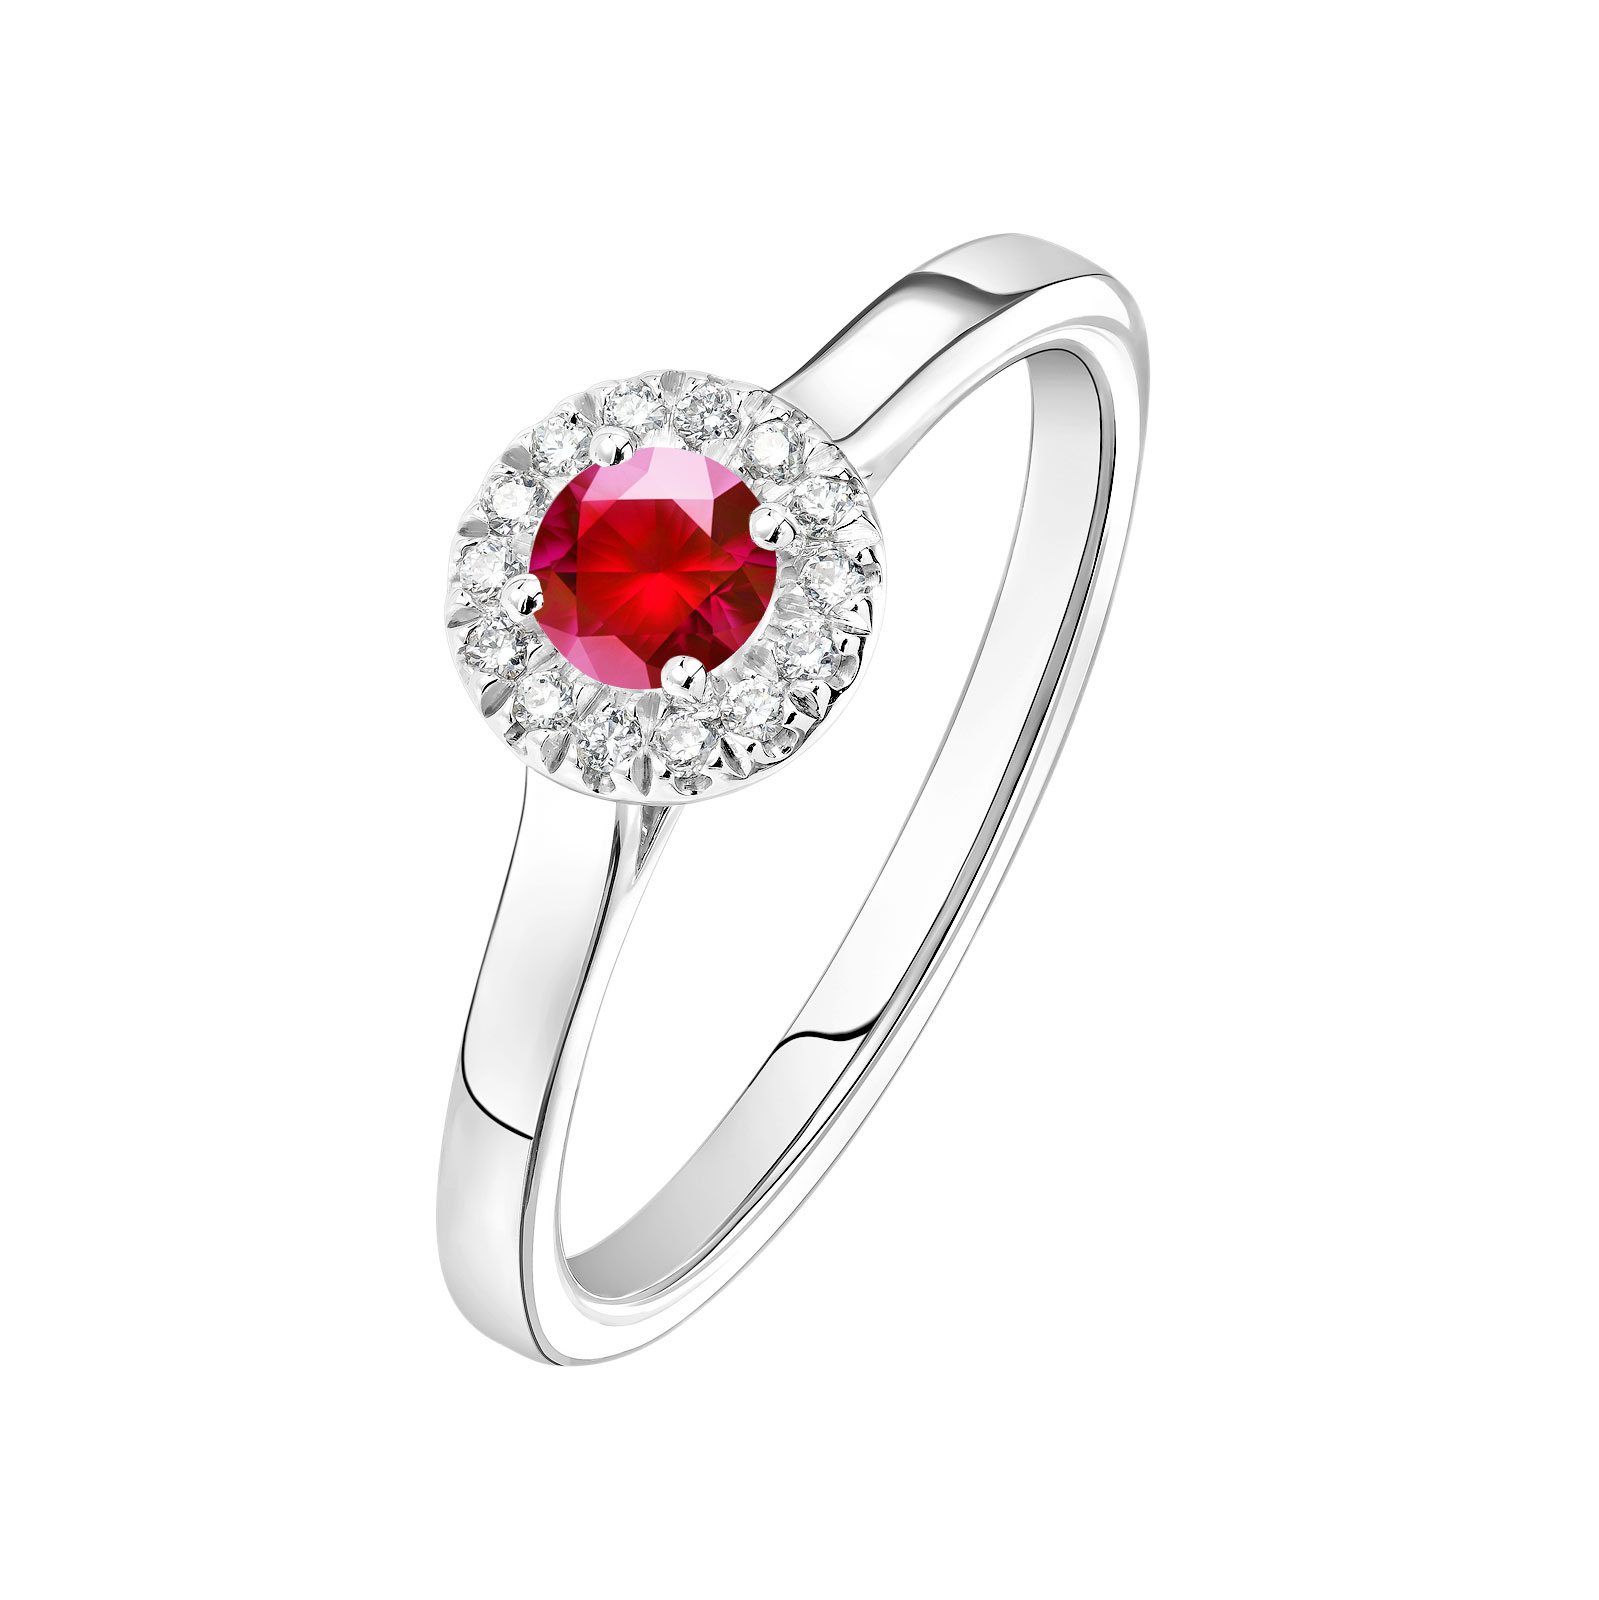 Ring White gold Ruby and diamonds Rétromantique S 1